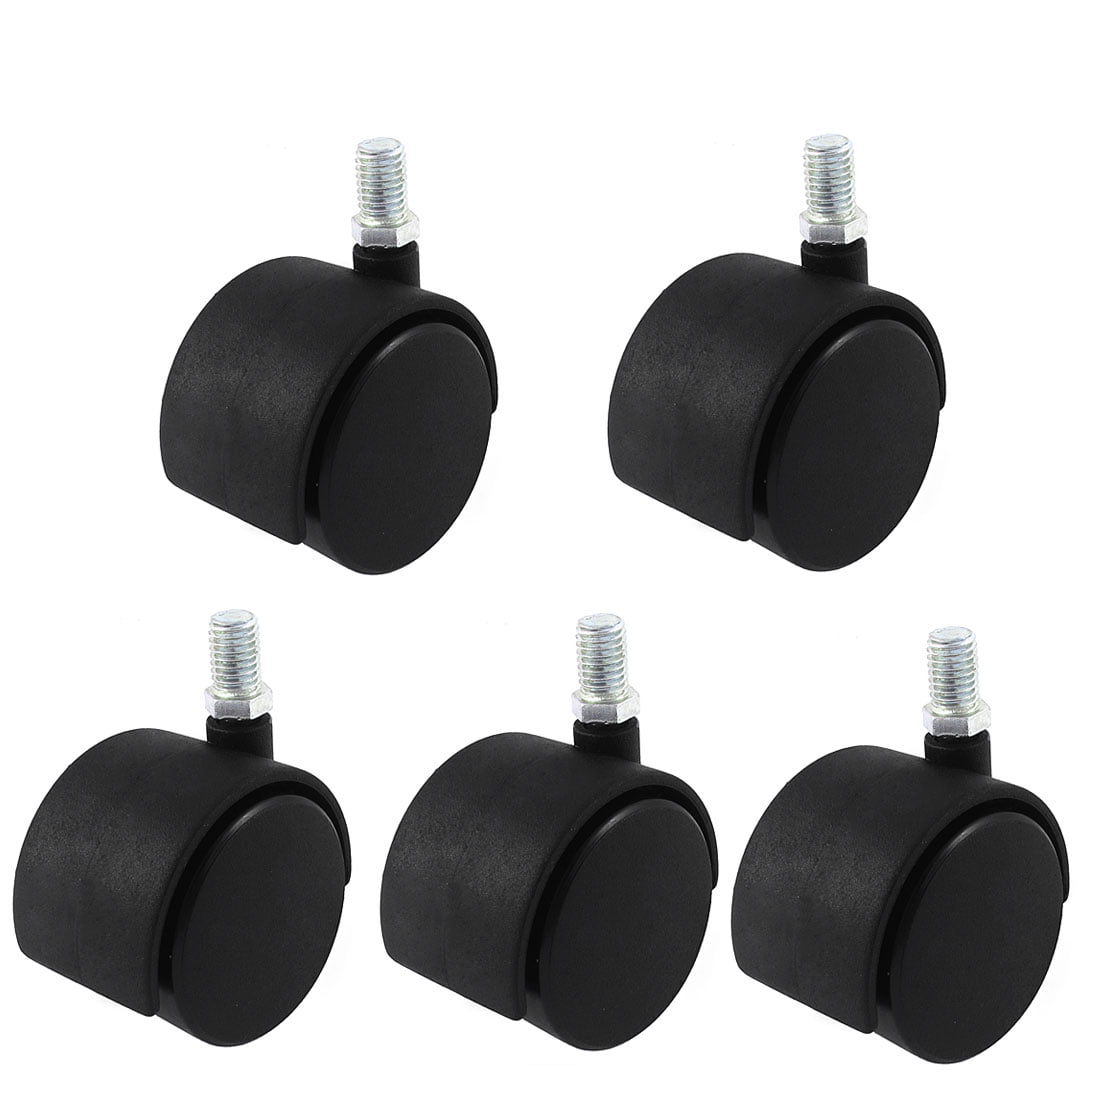 Quiet and Smooth Gliding,Safe for Woood Hardwood Carpet Floors Set of 5 NOT METRIC M10 Replacement Office Chair Caster Wheels by 8T8 Rubber Chair Casters with Threaded Stem 3/8''-16X1 